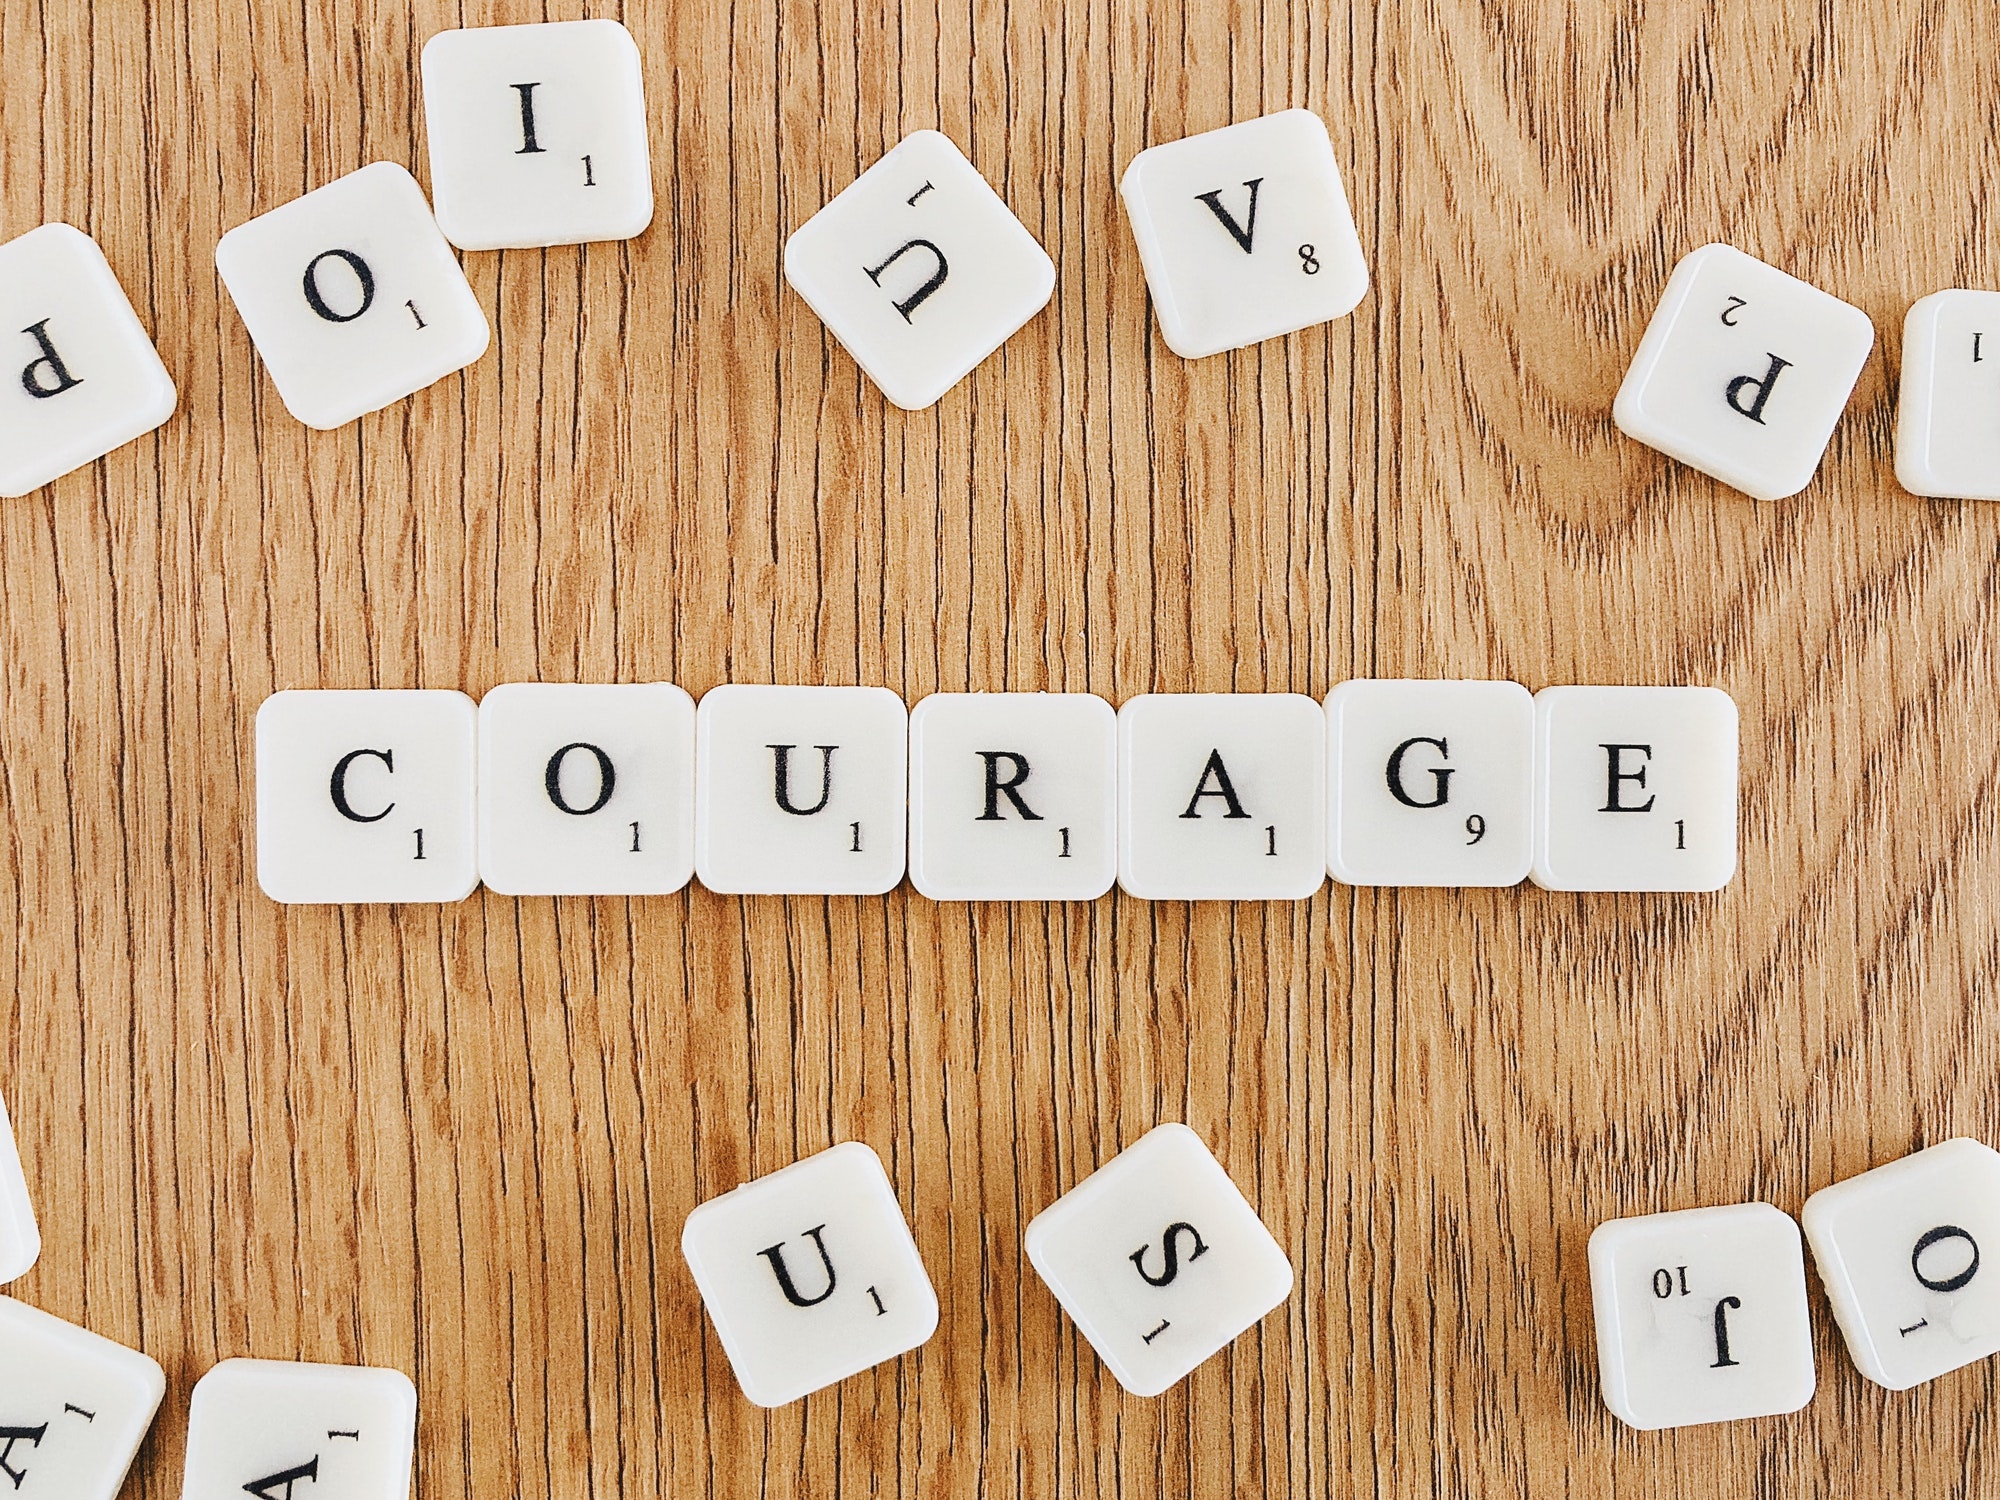 “Courage” written with scrabble tiles